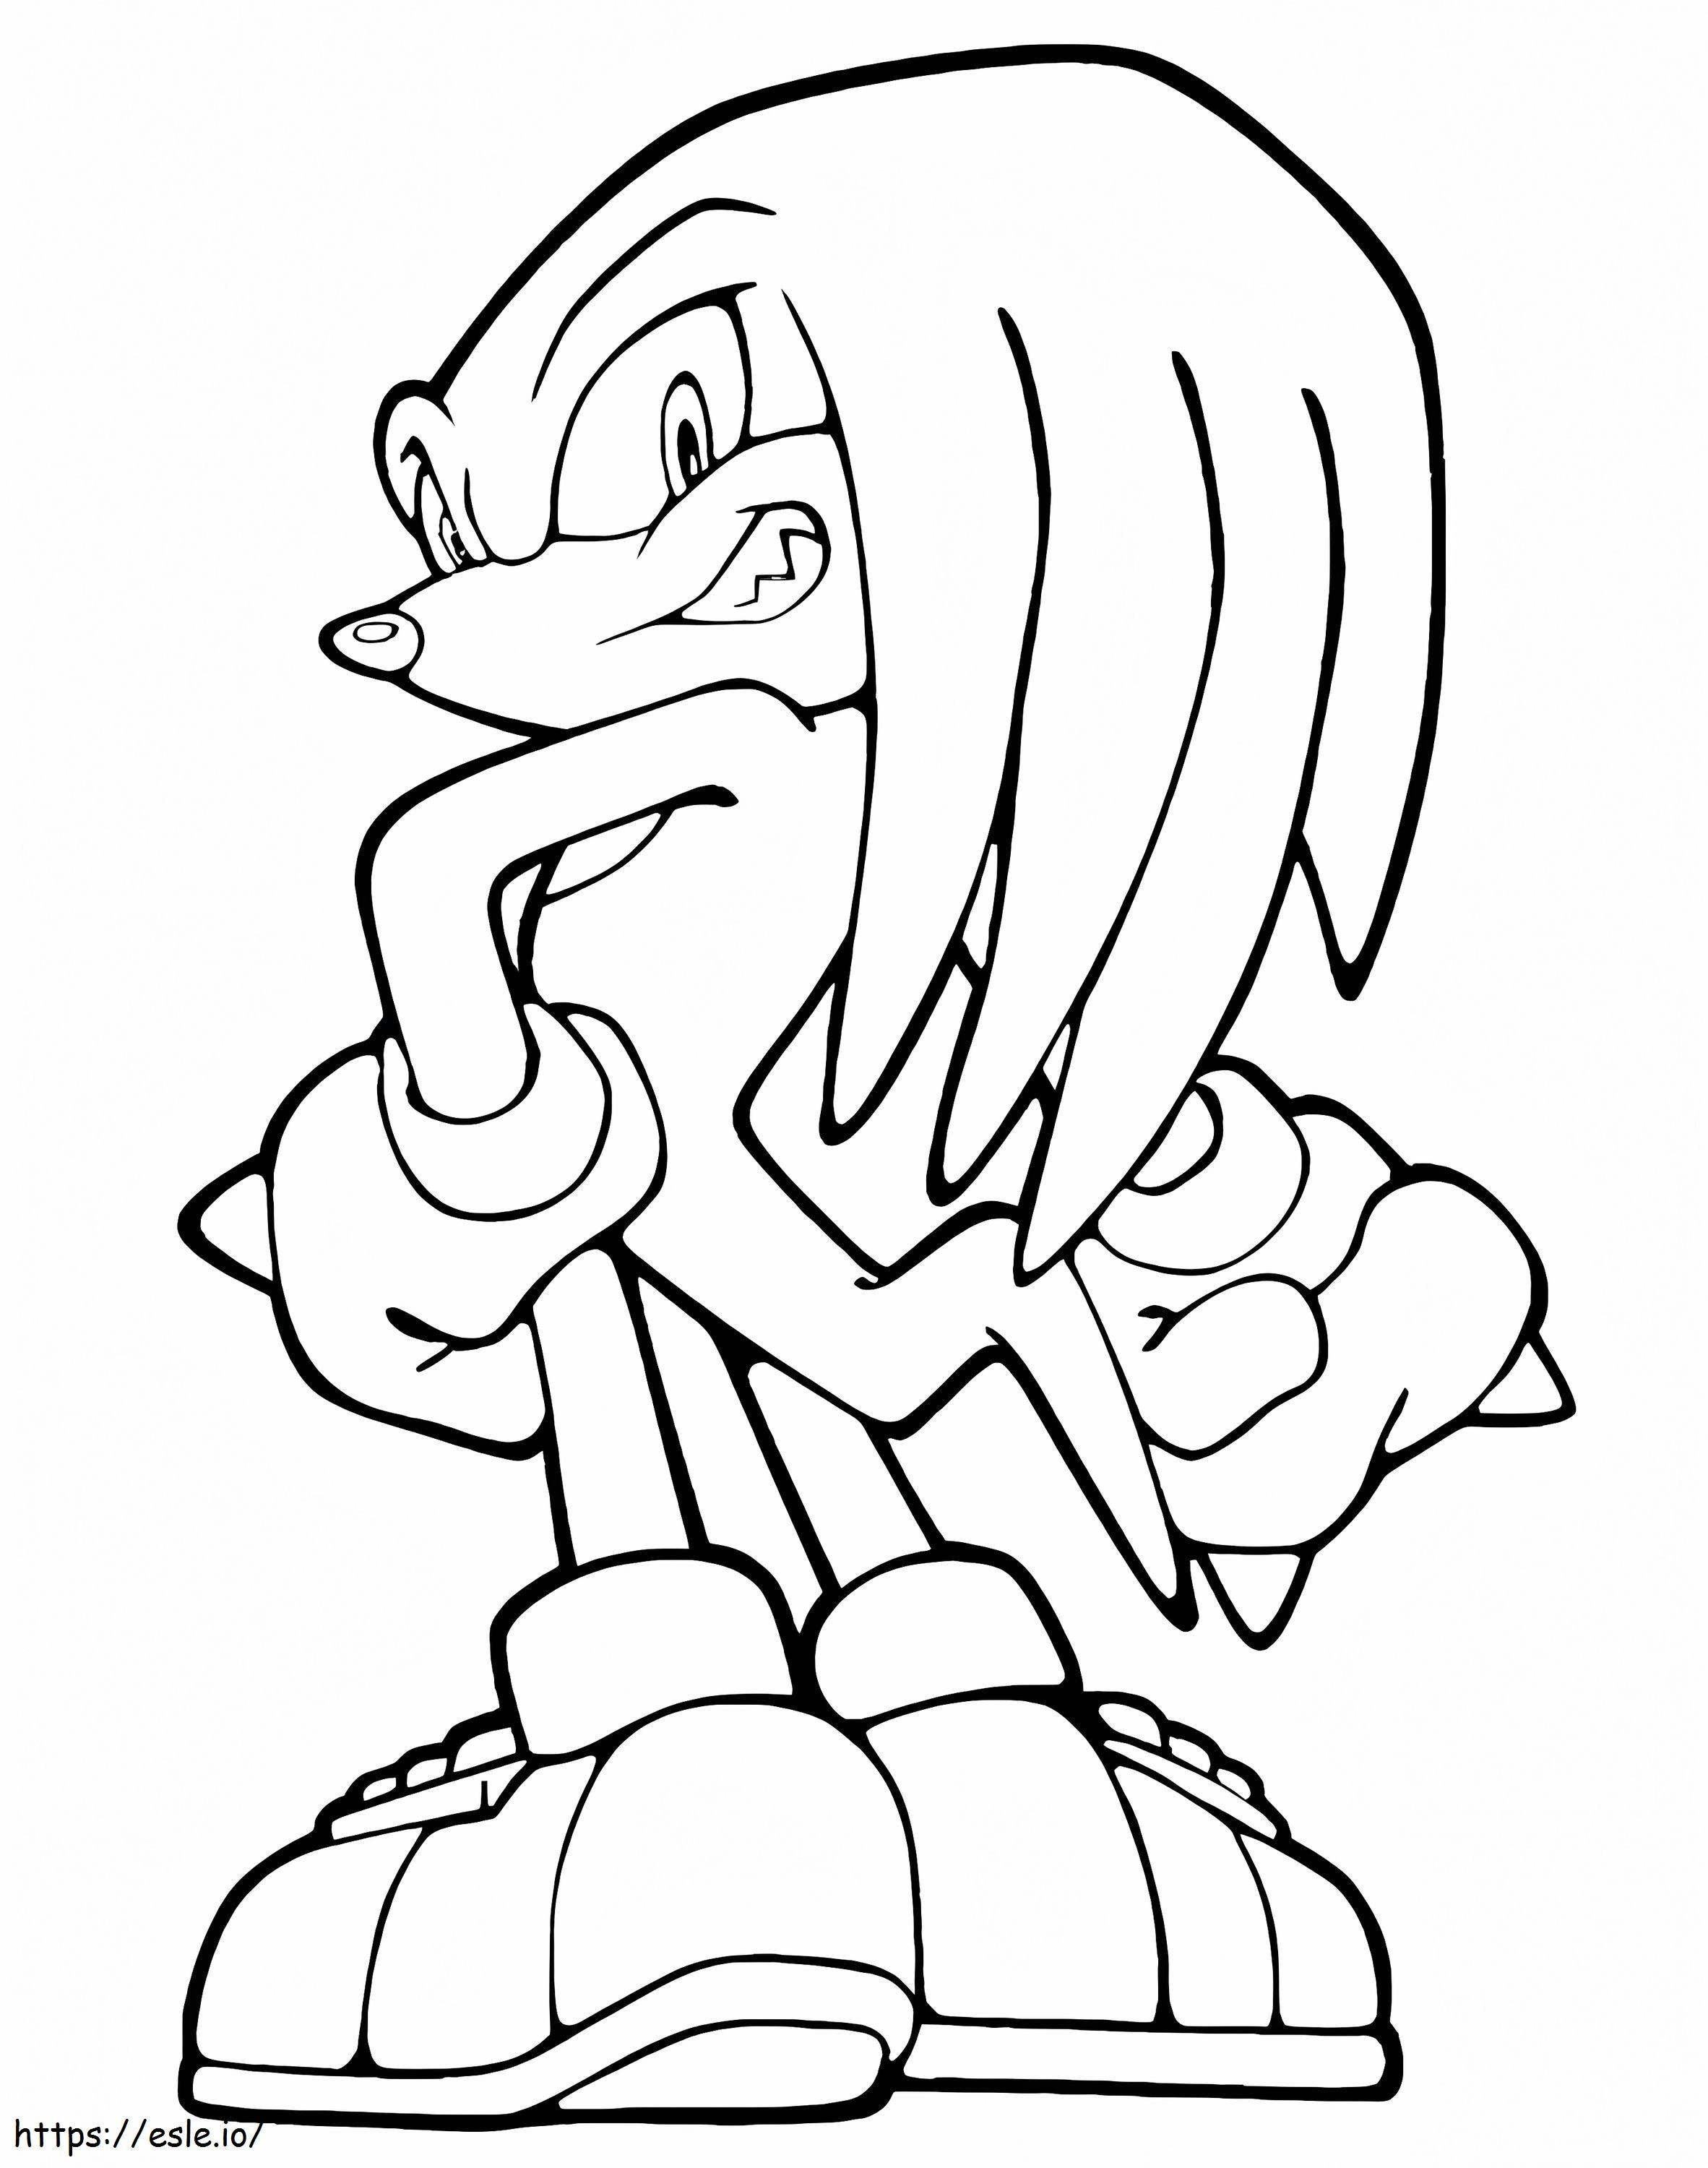 Print Knuckles The Echidna coloring page